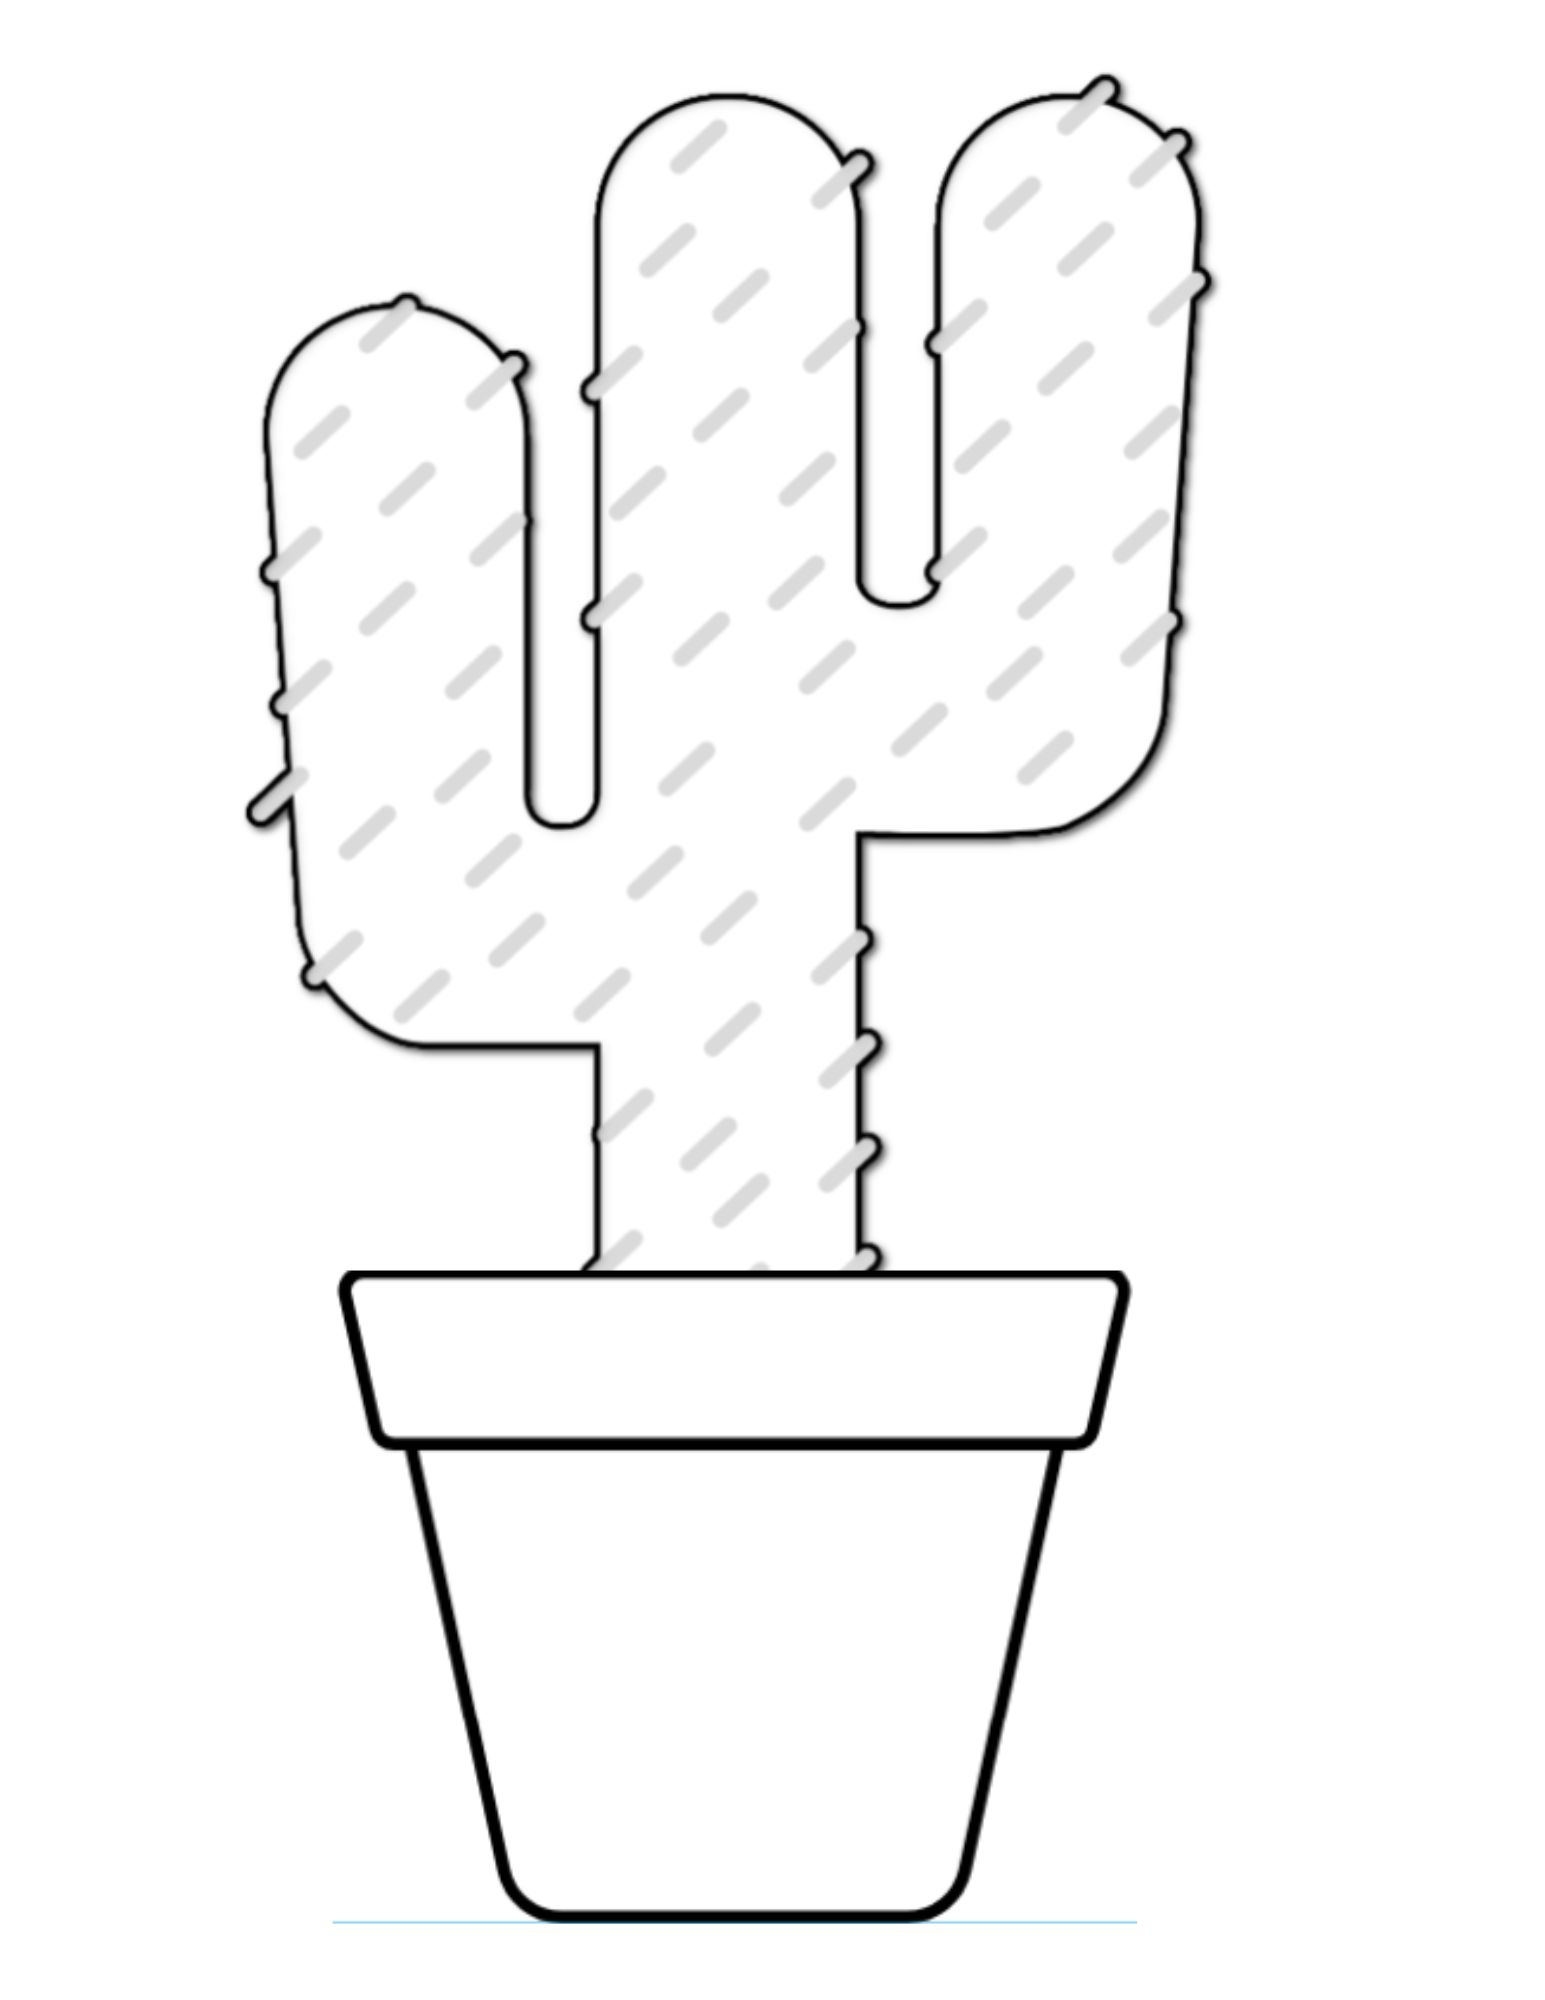 Cactus Craft For Kids With Free Cactus Printable intended for Free Cactus Printable